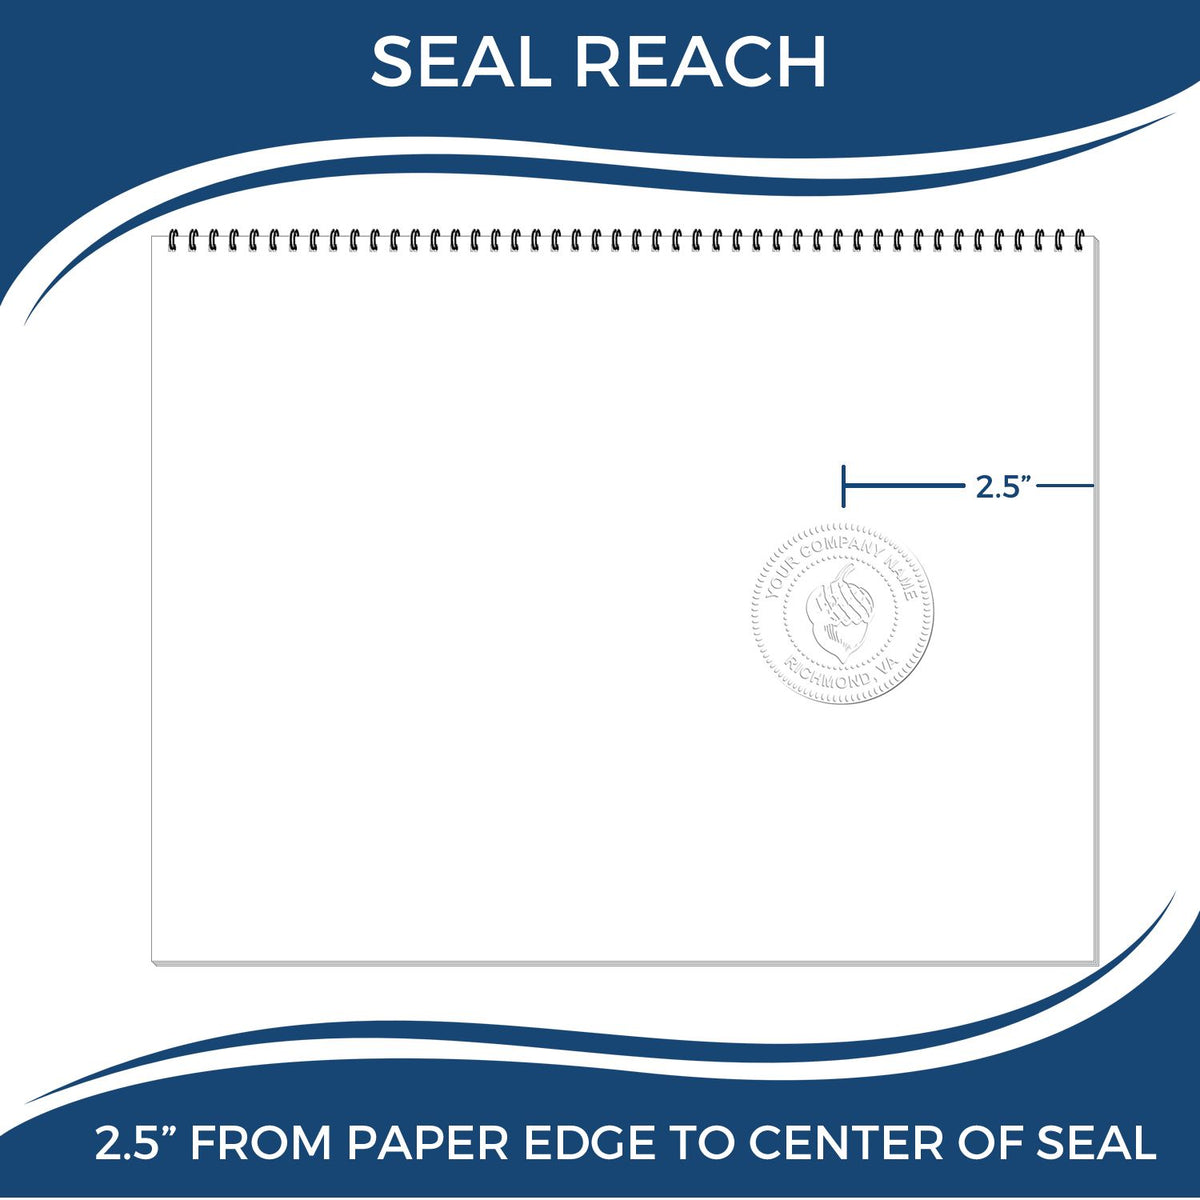 An infographic showing the seal reach which is represented by a ruler and a miniature seal image of the Long Reach New Jersey Geology Seal